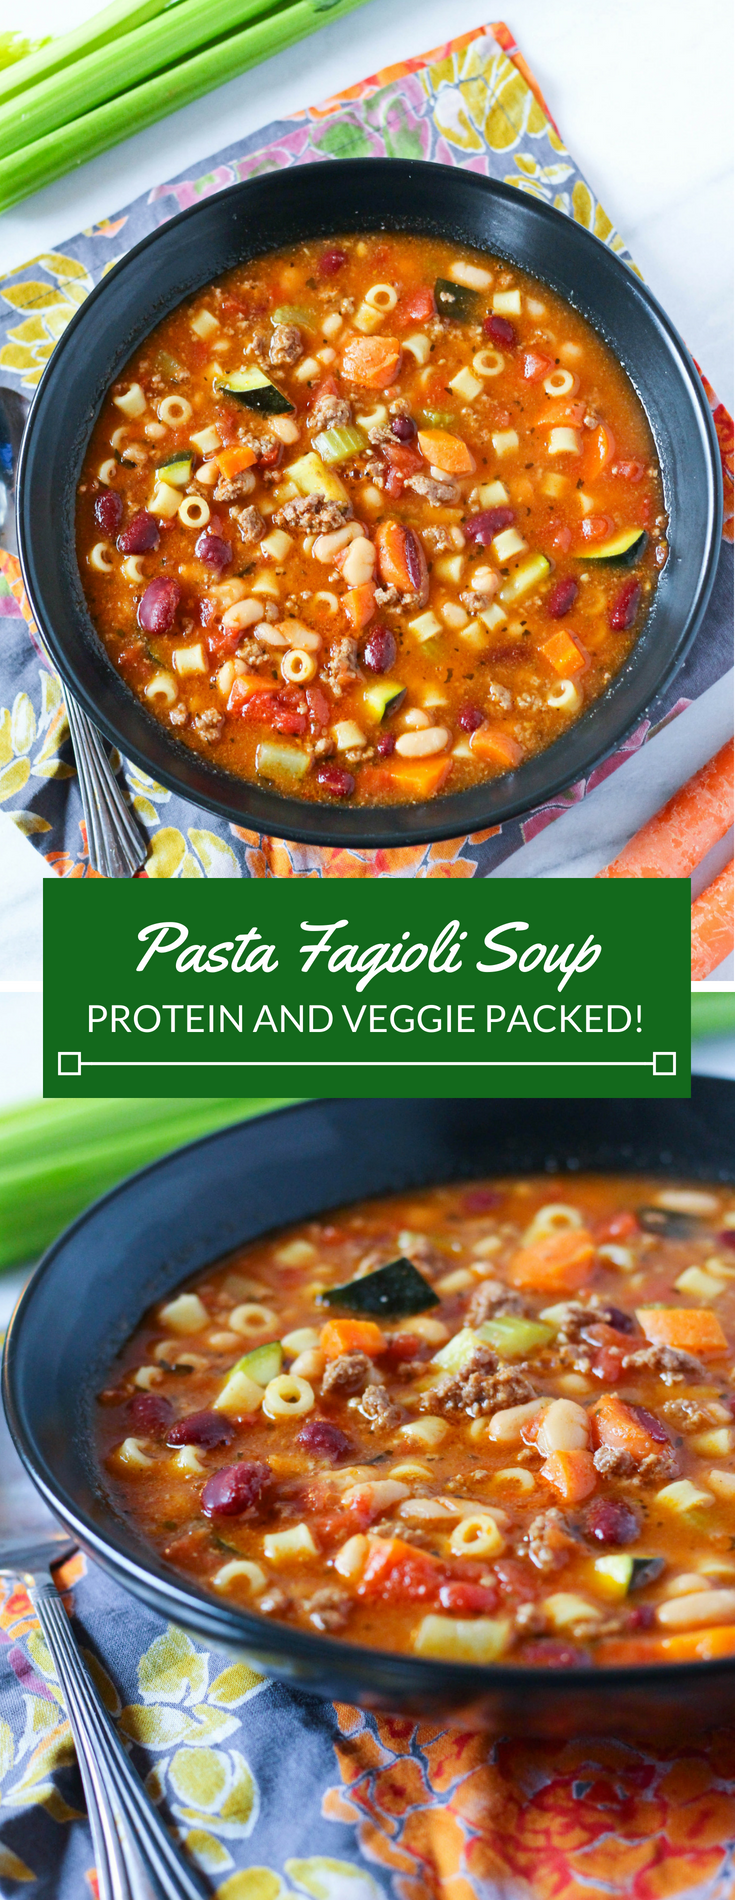 Pasta Fagioli Soup: Protein packed and full of veggies!